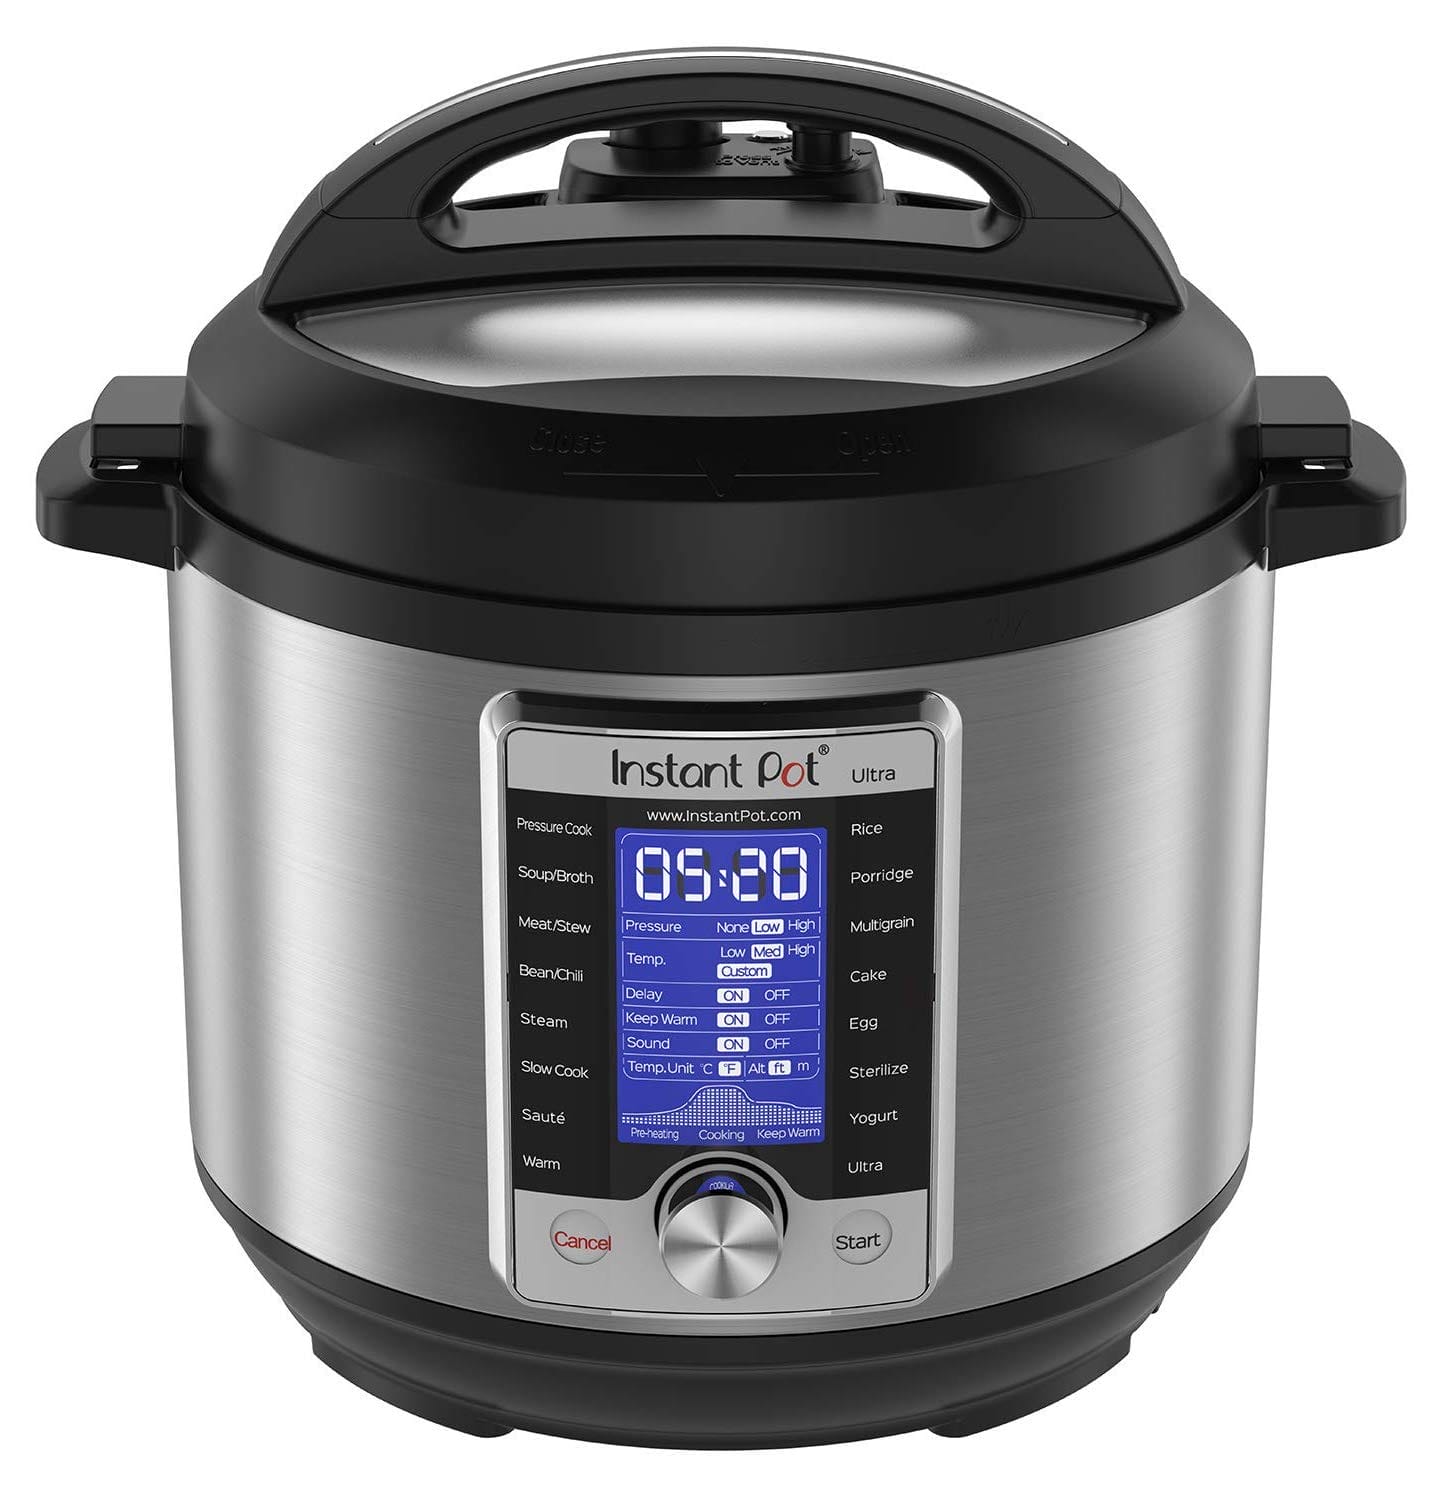 10 best stainless steel pressure cookers tested reviewed 1145 21 3